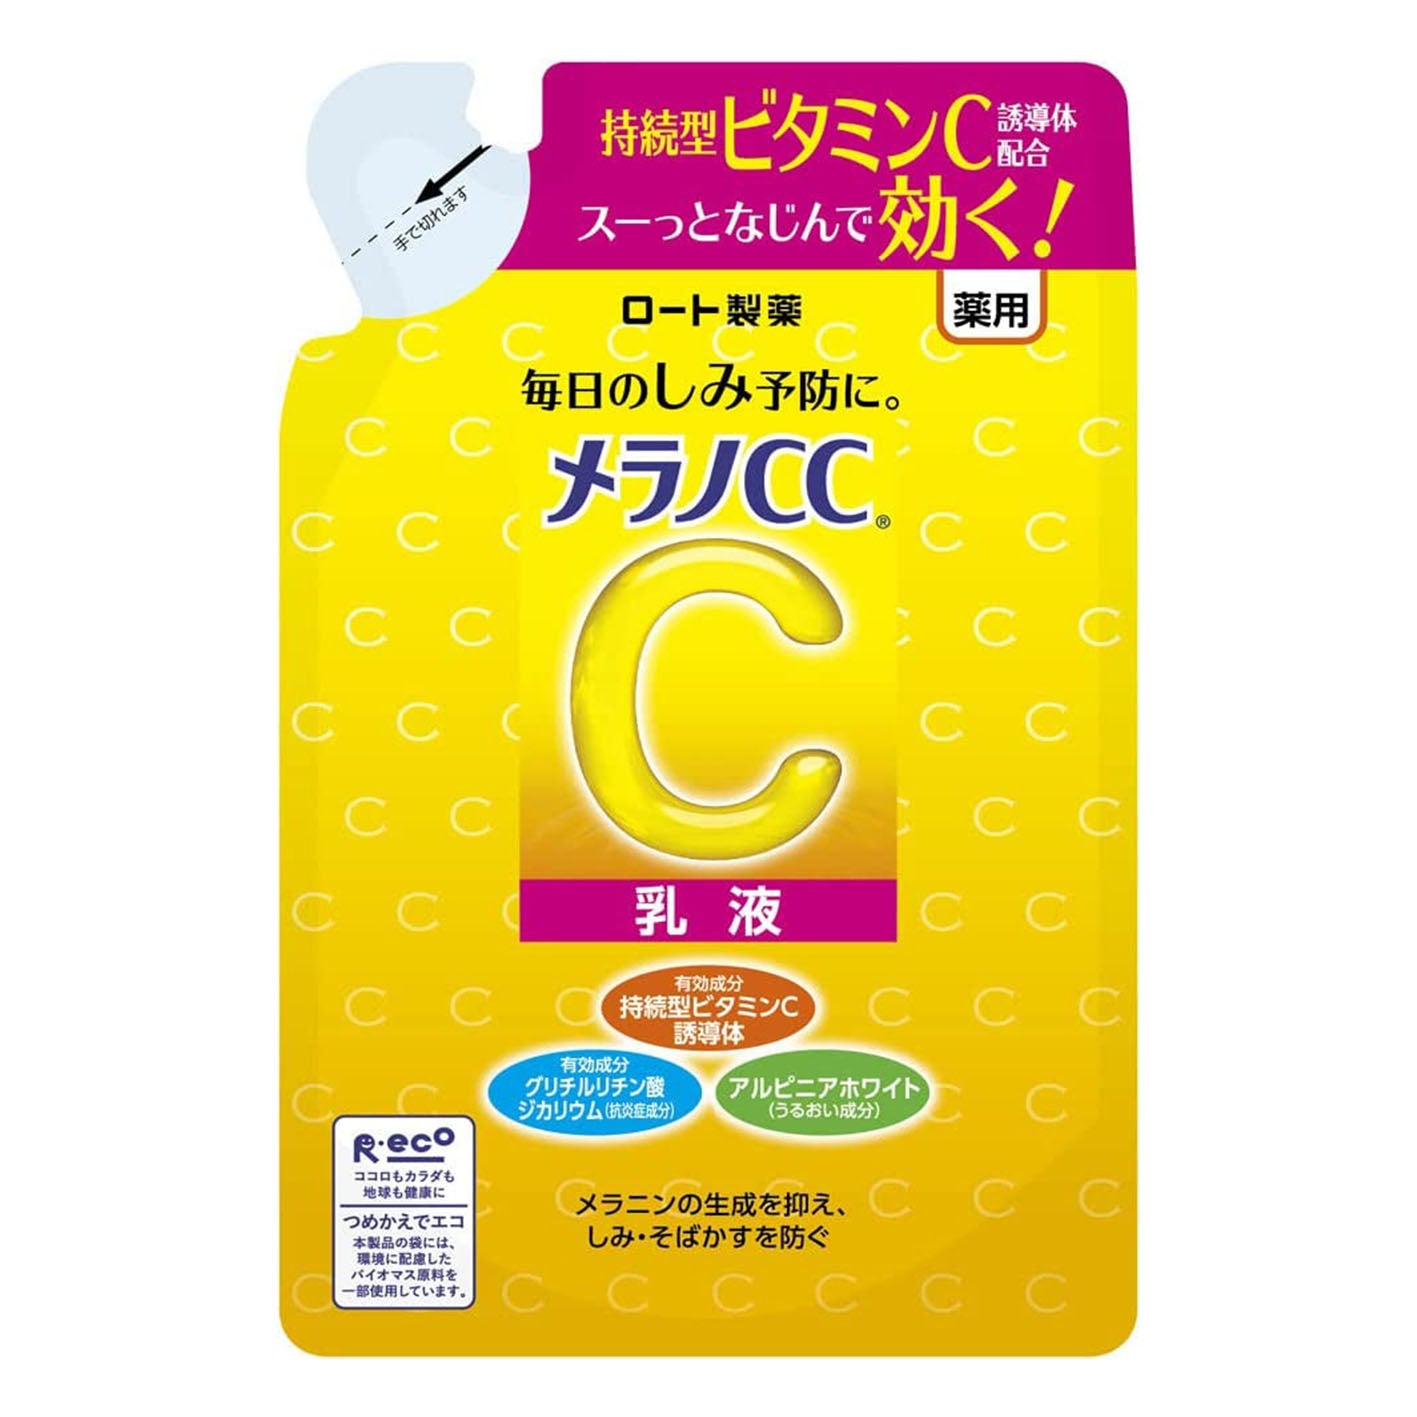 Melano CC Medicated Anti Spot Whitening Emulsion120ml - Refill - Harajuku Culture Japan - Japanease Products Store Beauty and Stationery